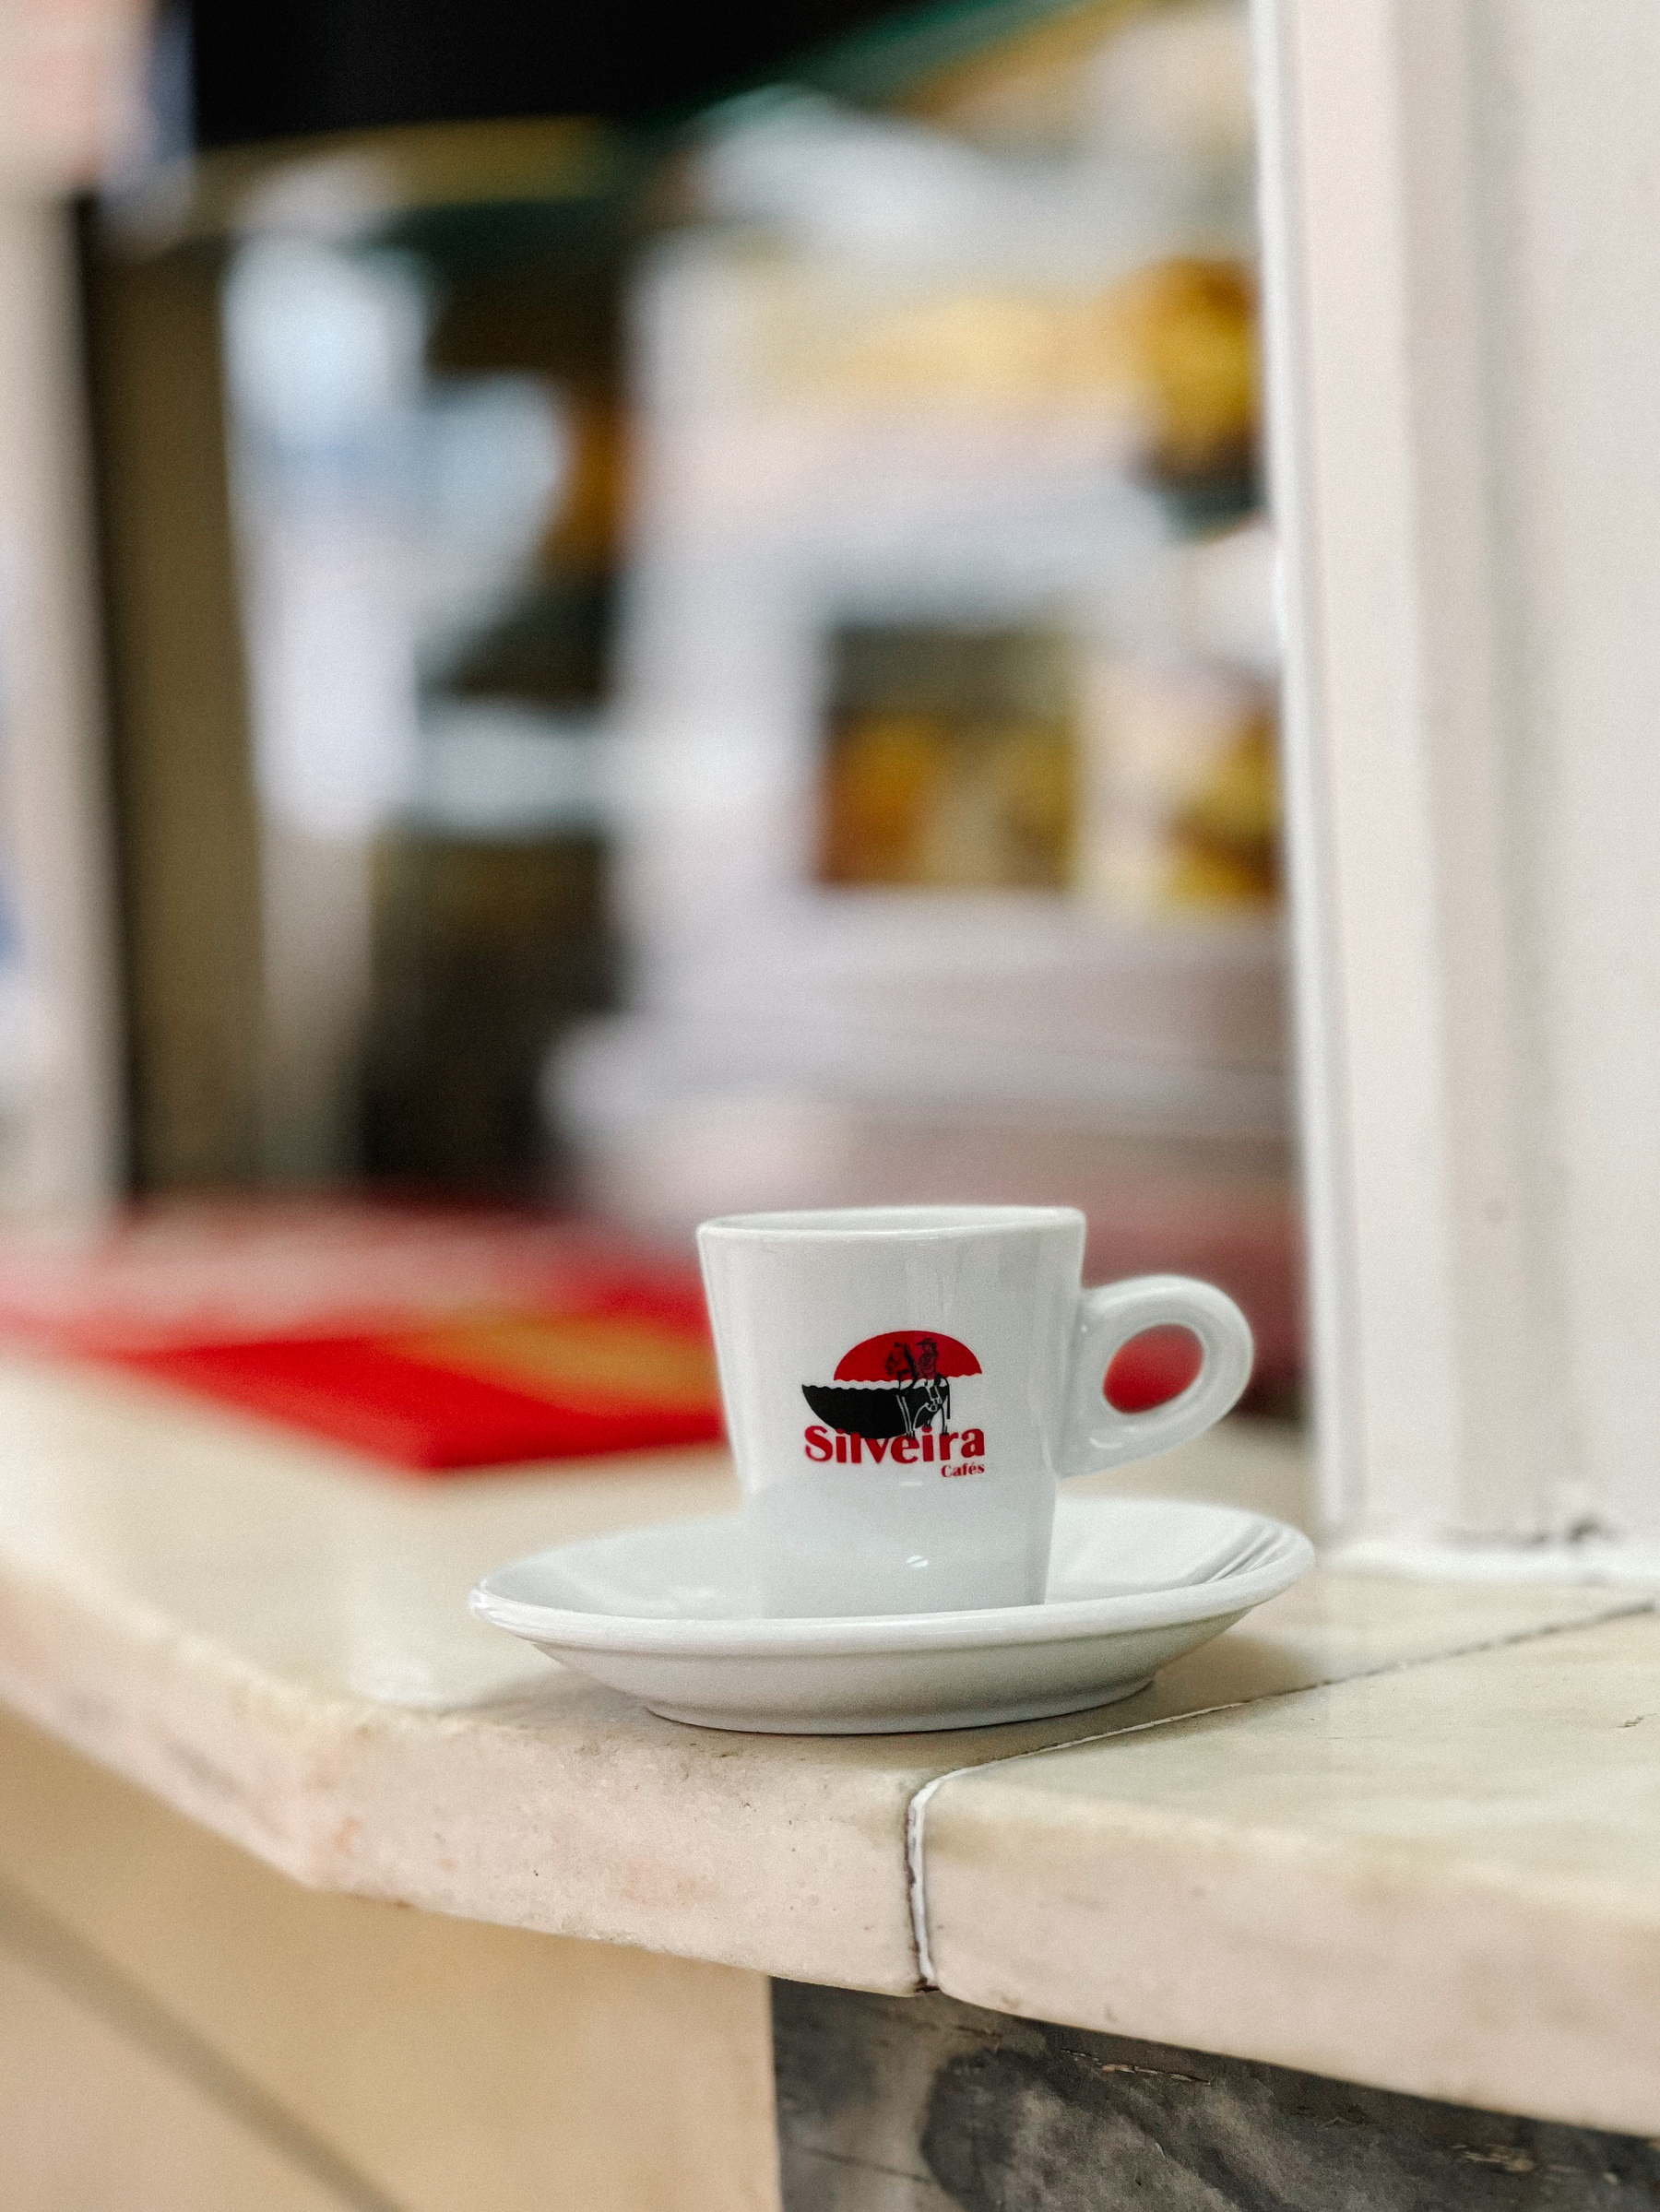 A white espresso cup with &ldquo;Silveira Cafes&rdquo; printed on it, sitting on a matching saucer, placed on the edge of a windowsill. The background is softly blurred.